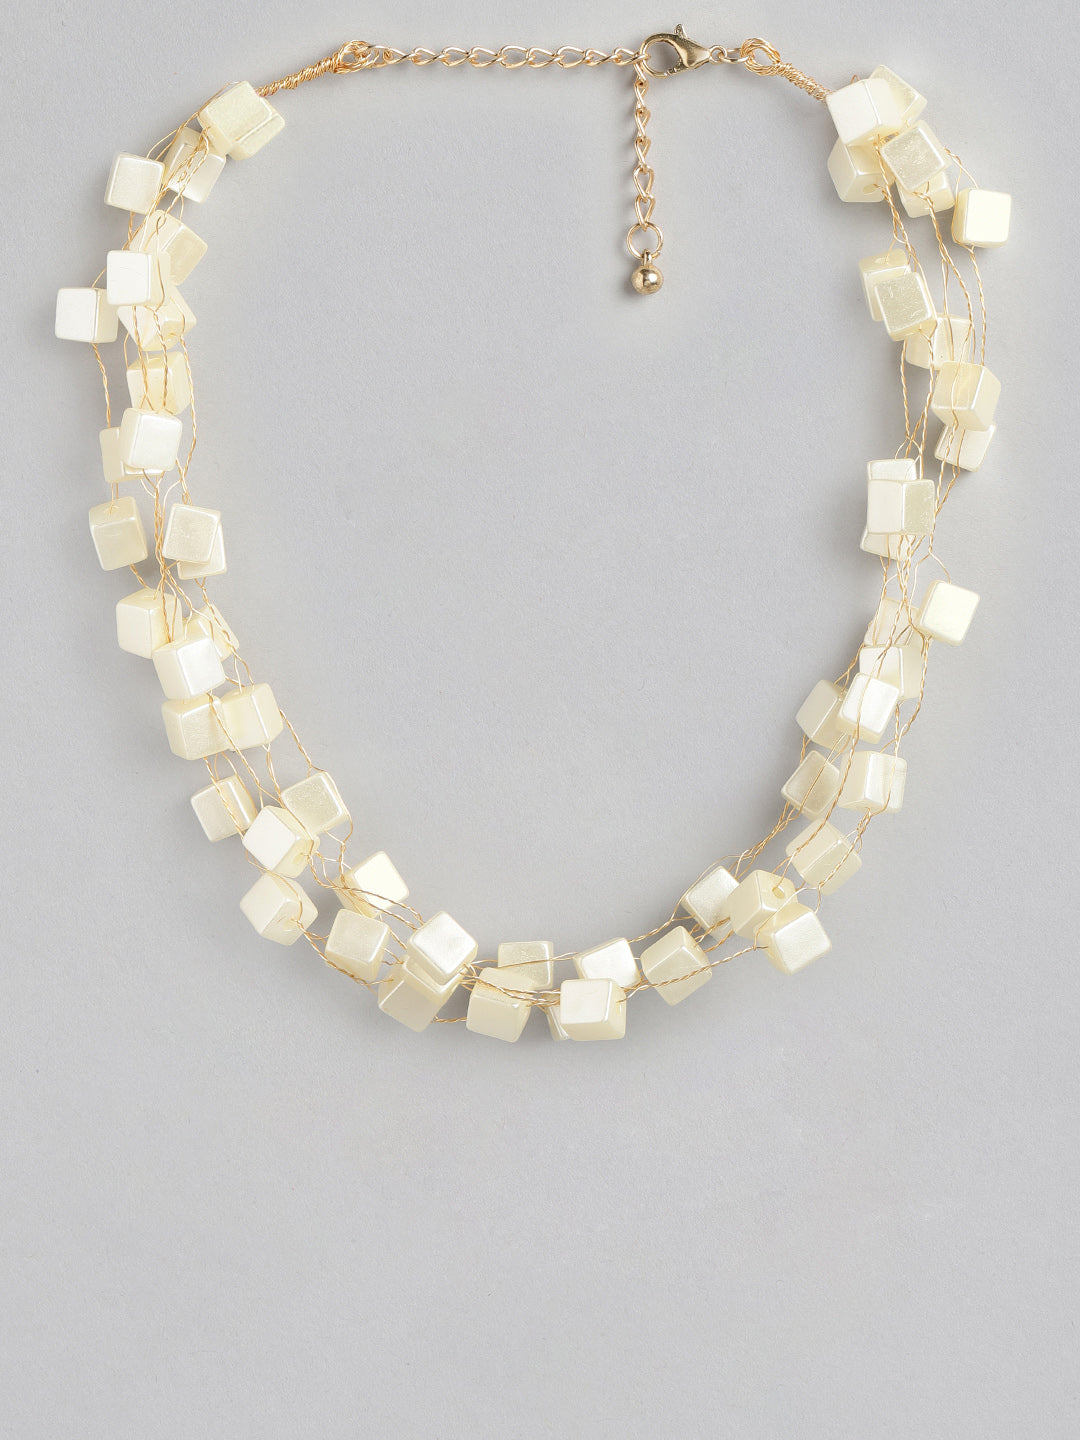 Blueberry White Cude mother of pearl chain necklace